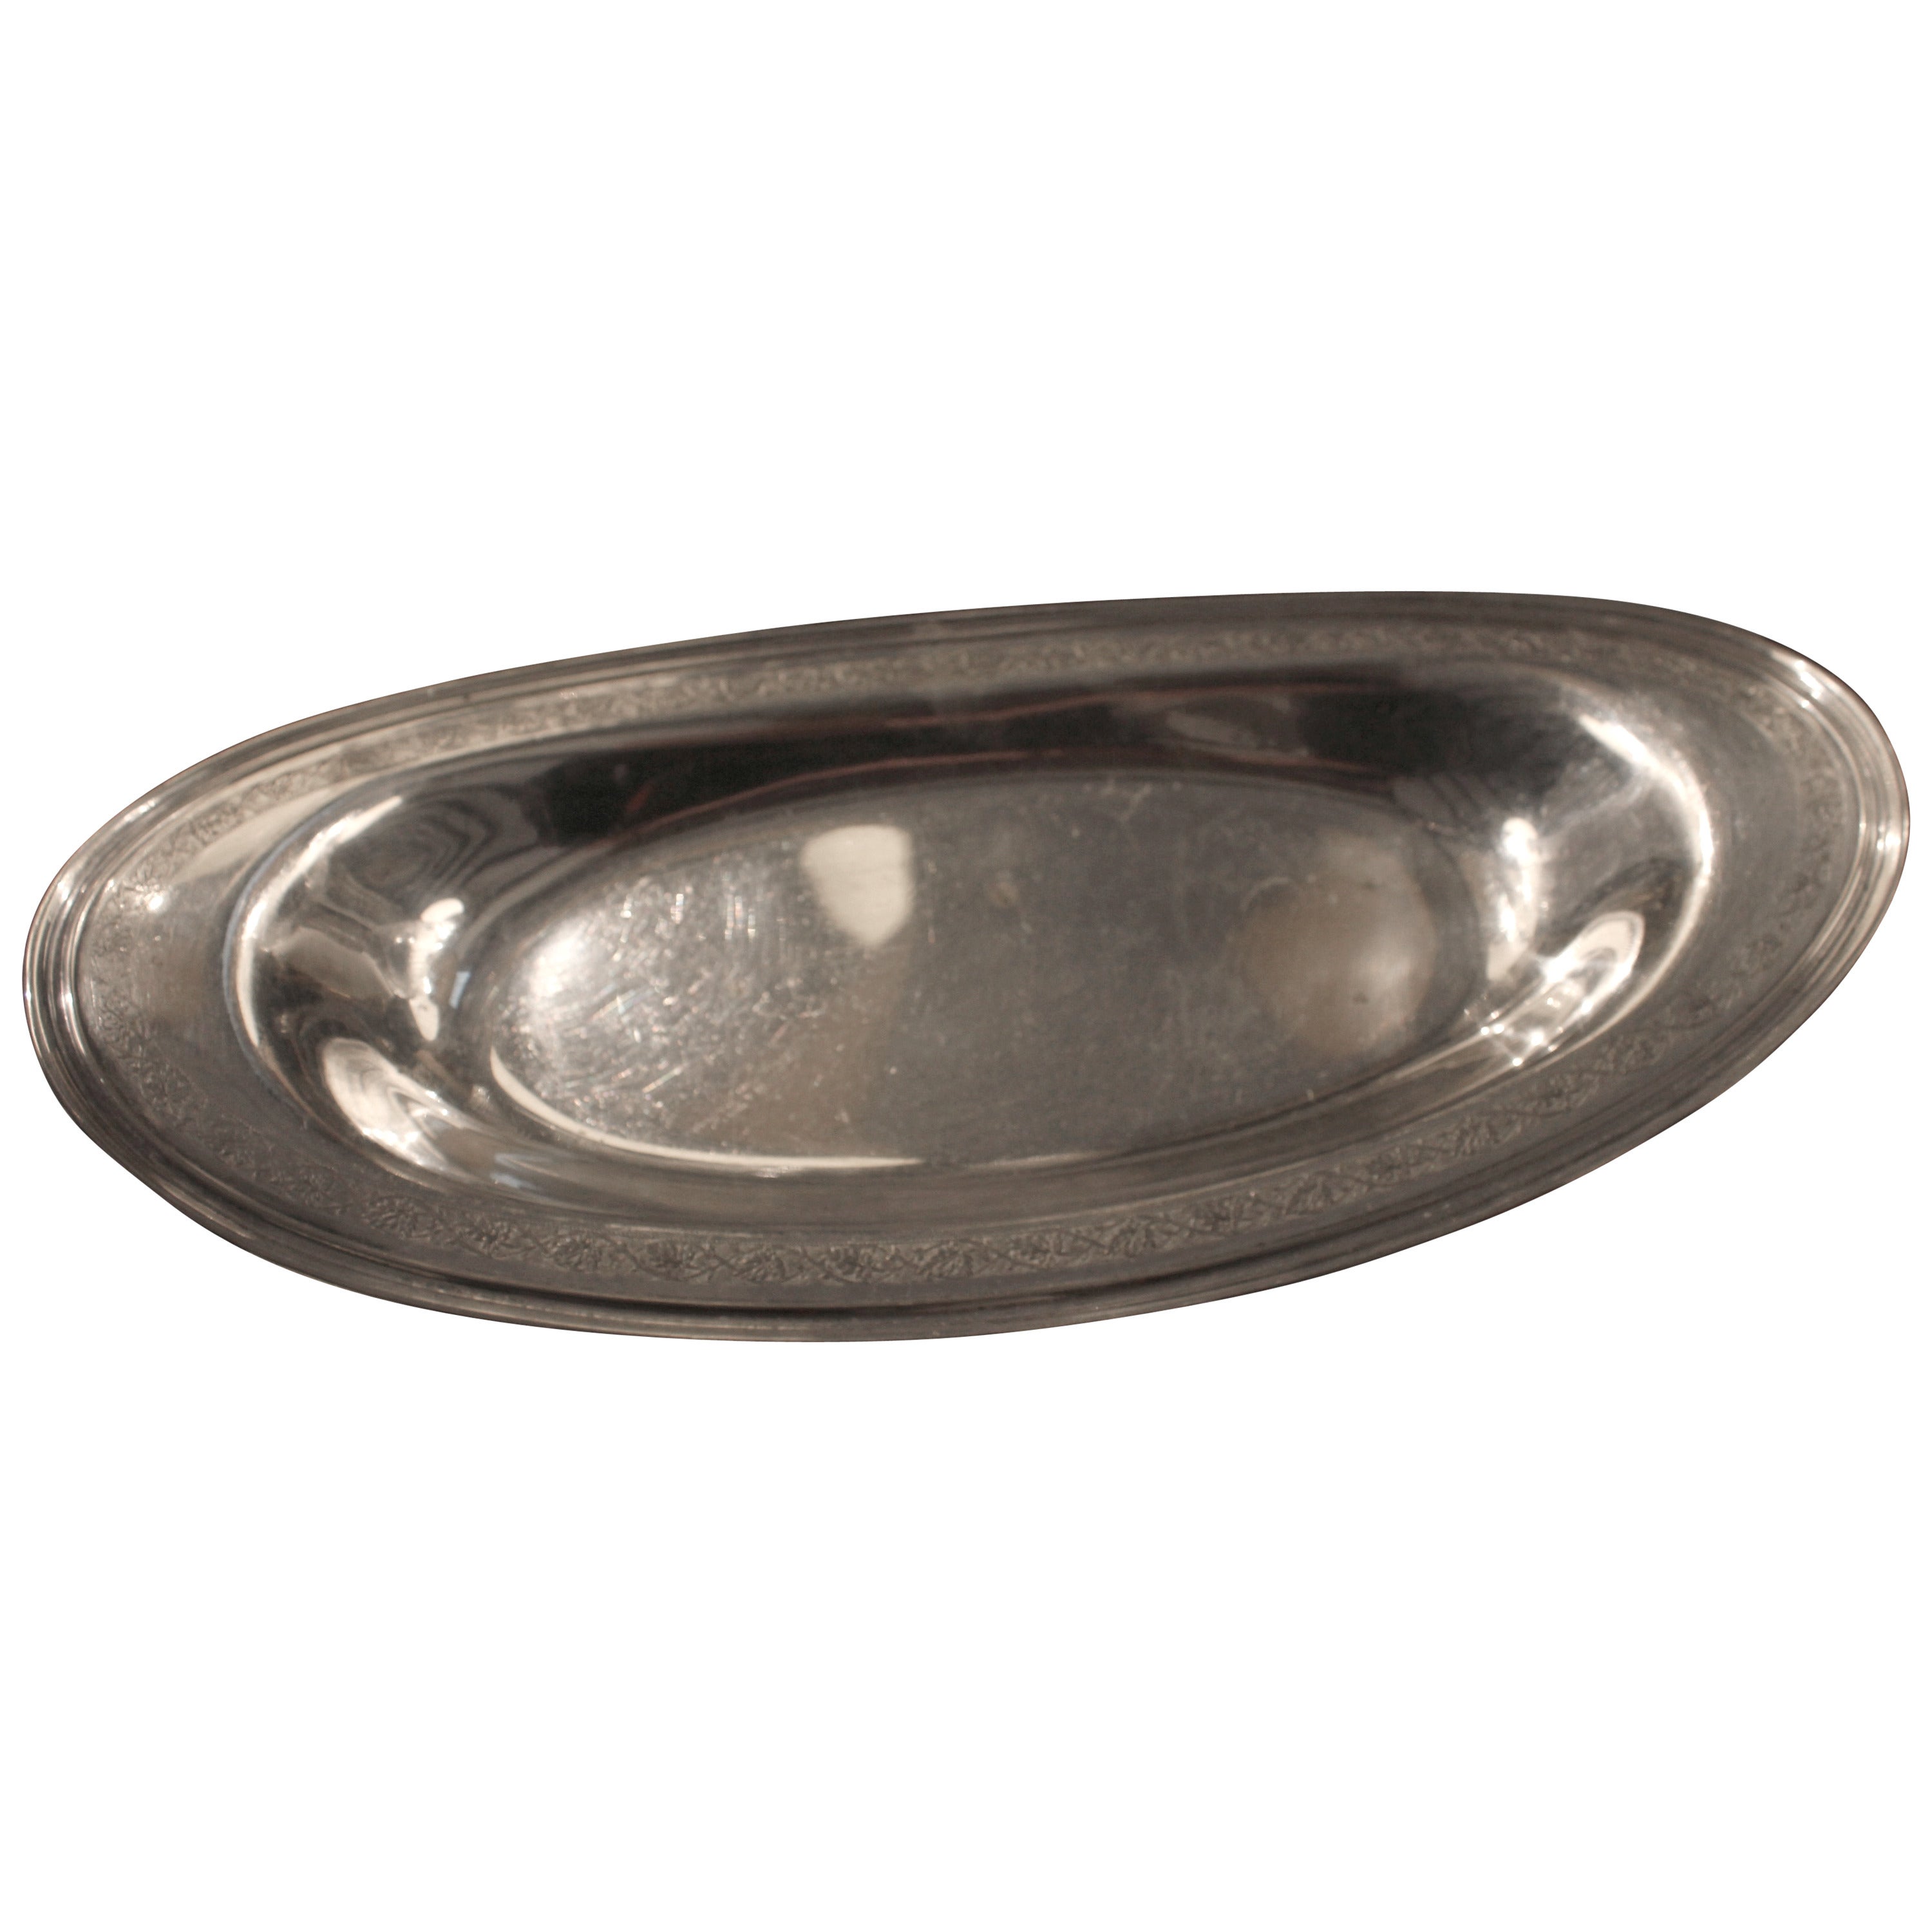 Oblong Oval Shaped, 1930s Silver Spoon Dish or Bowl, England For Sale